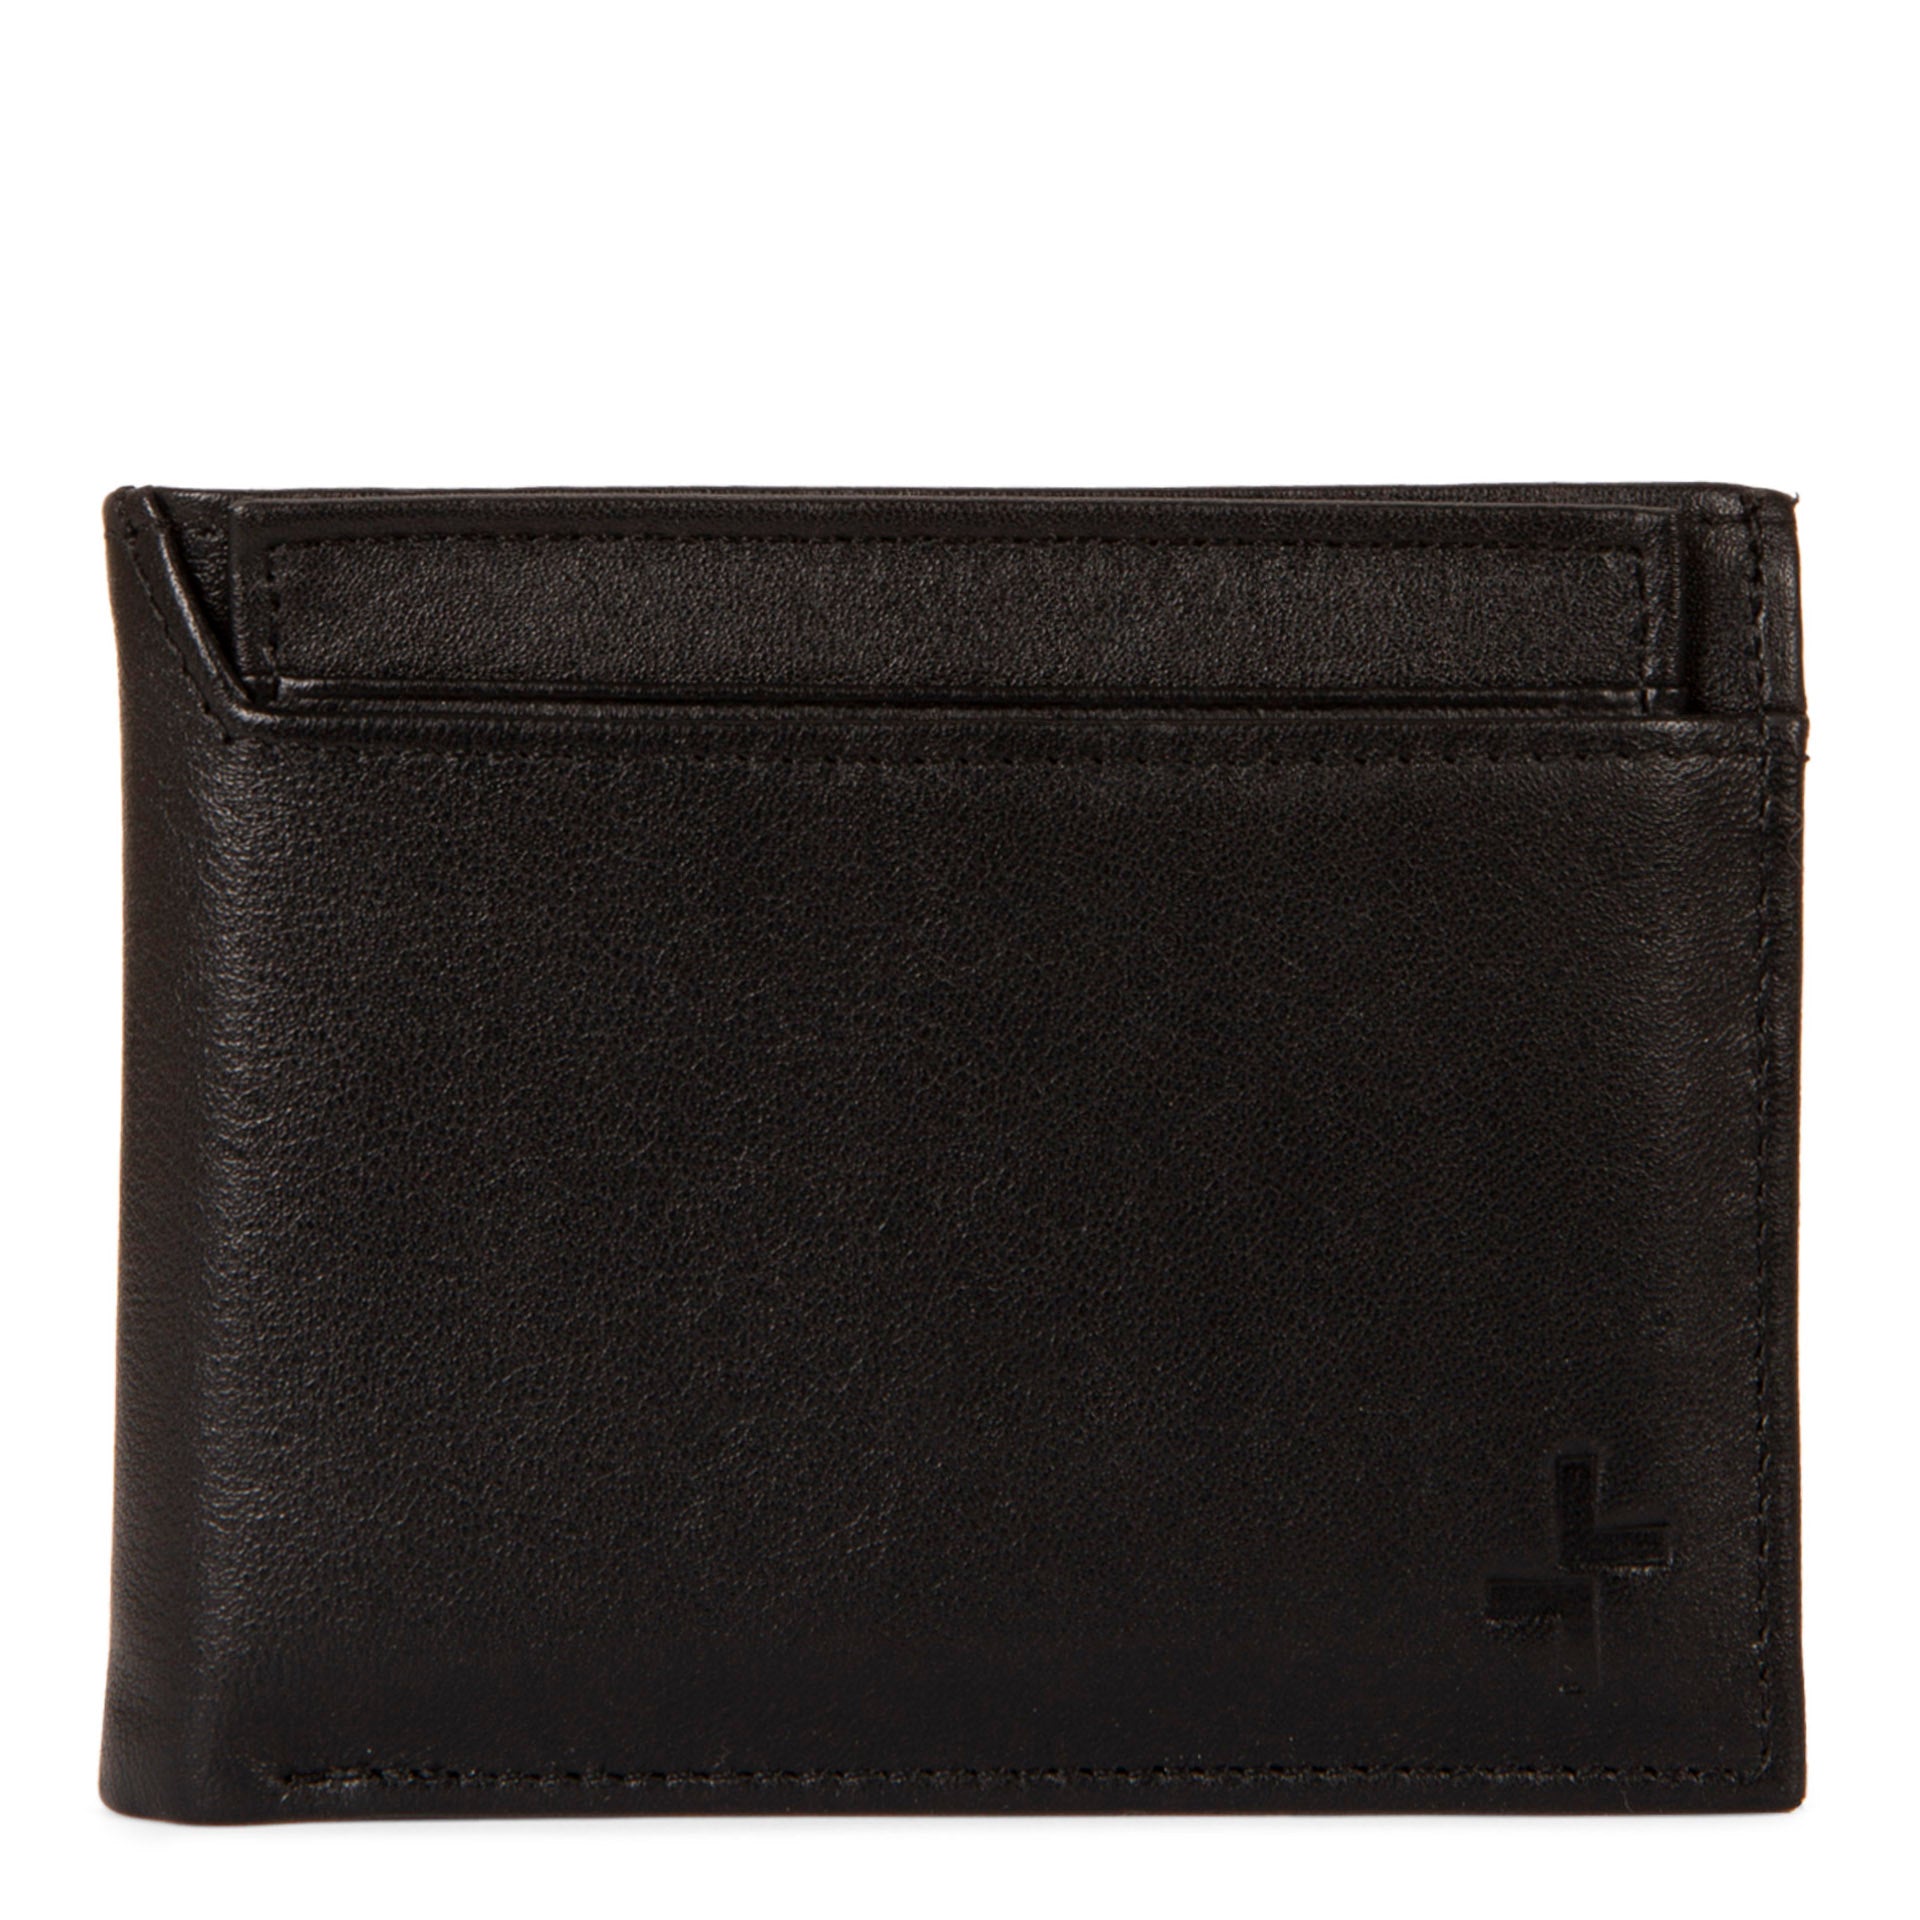 Leather RFID Flip-Up Wing Wallet